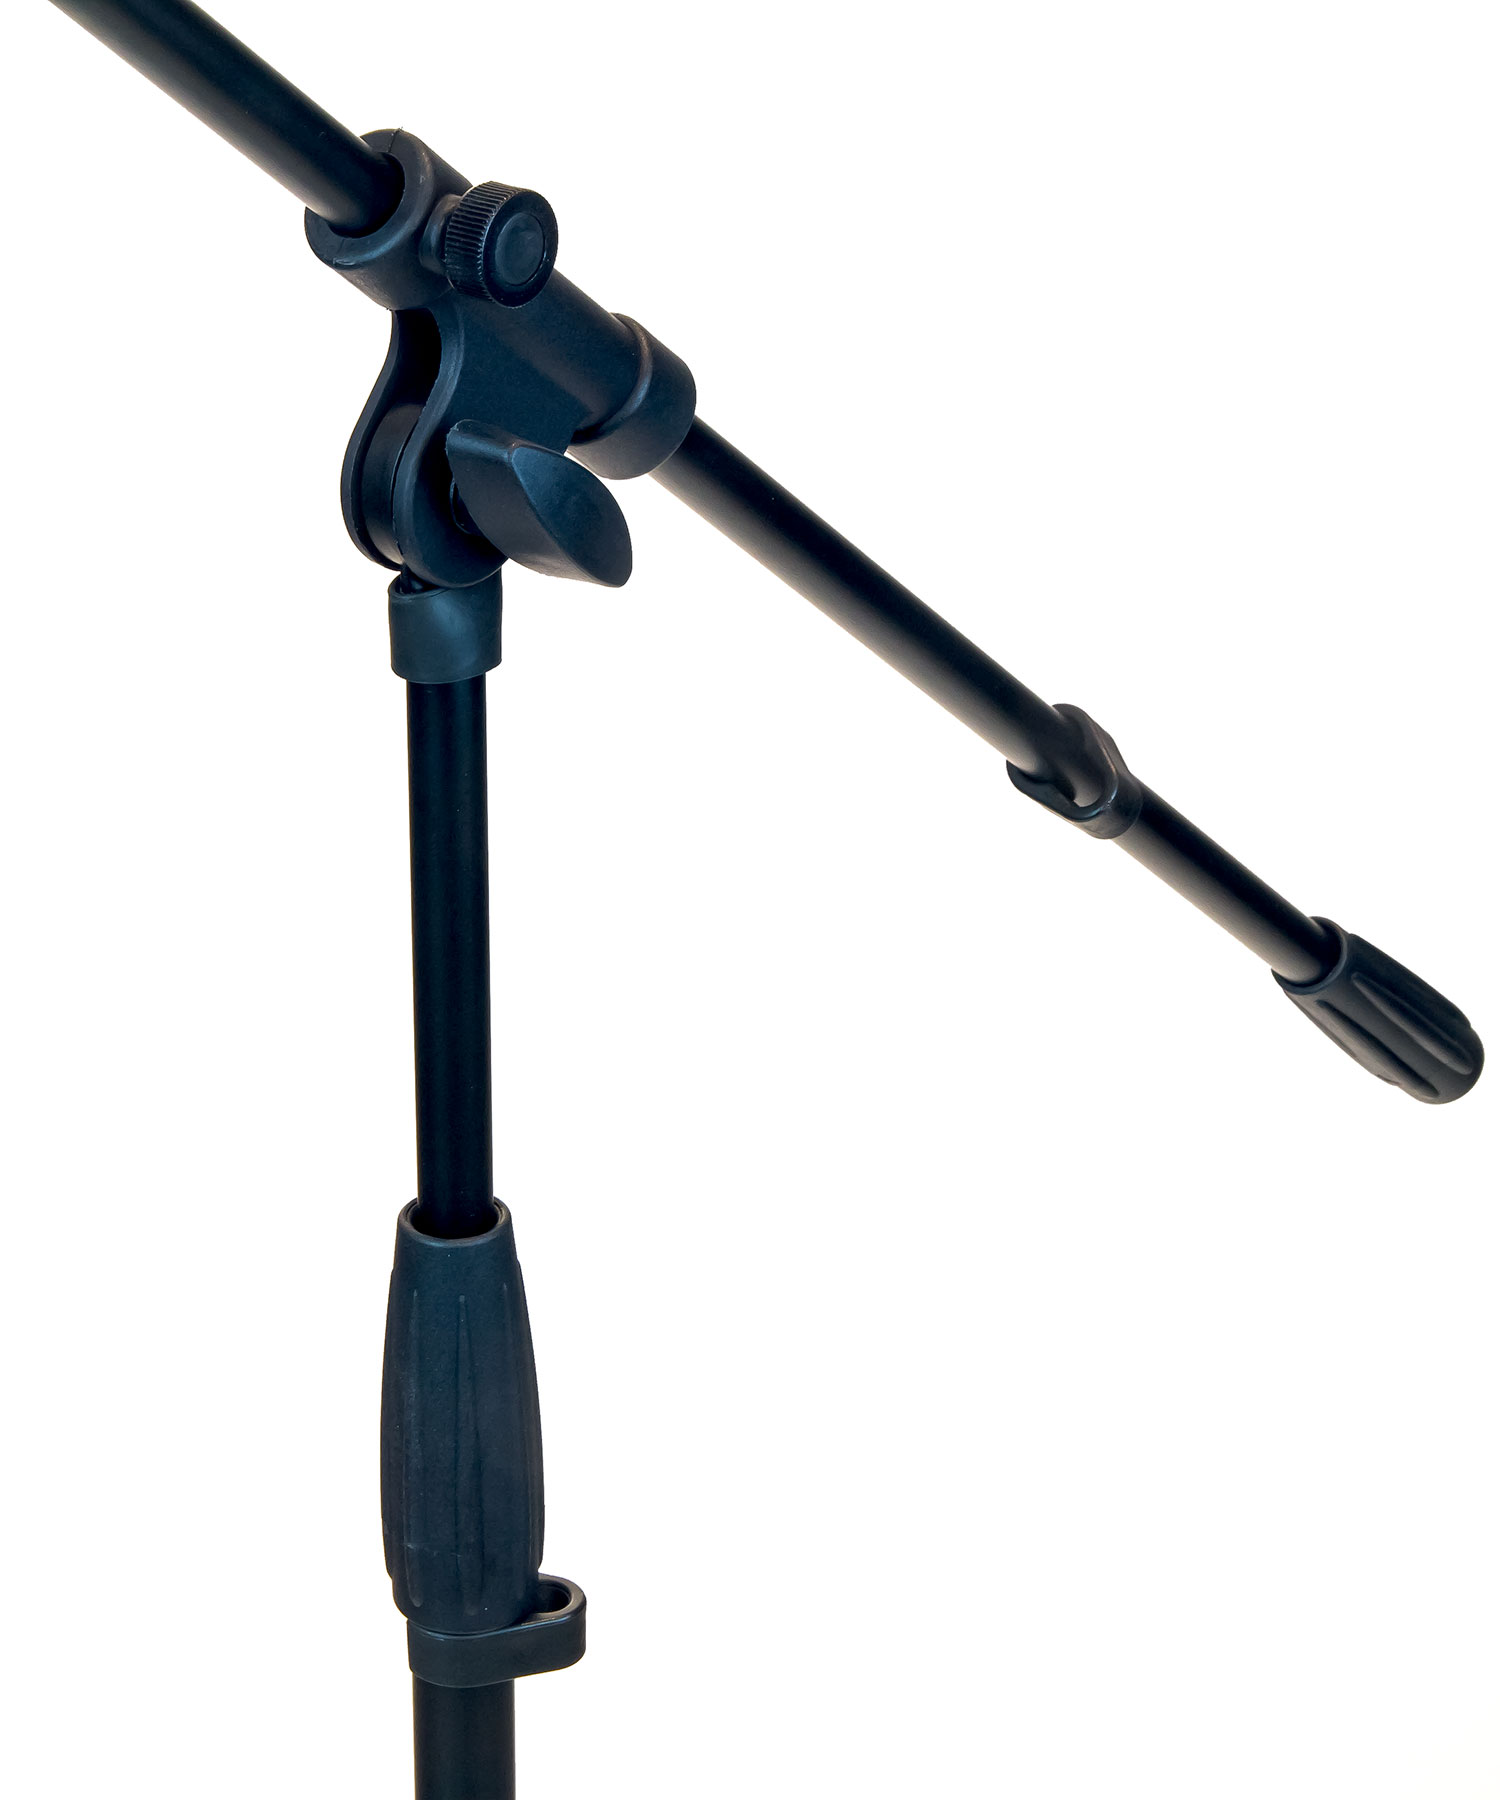 X-tone Xh 6000 Pied Micro - Microphone stand - Variation 1